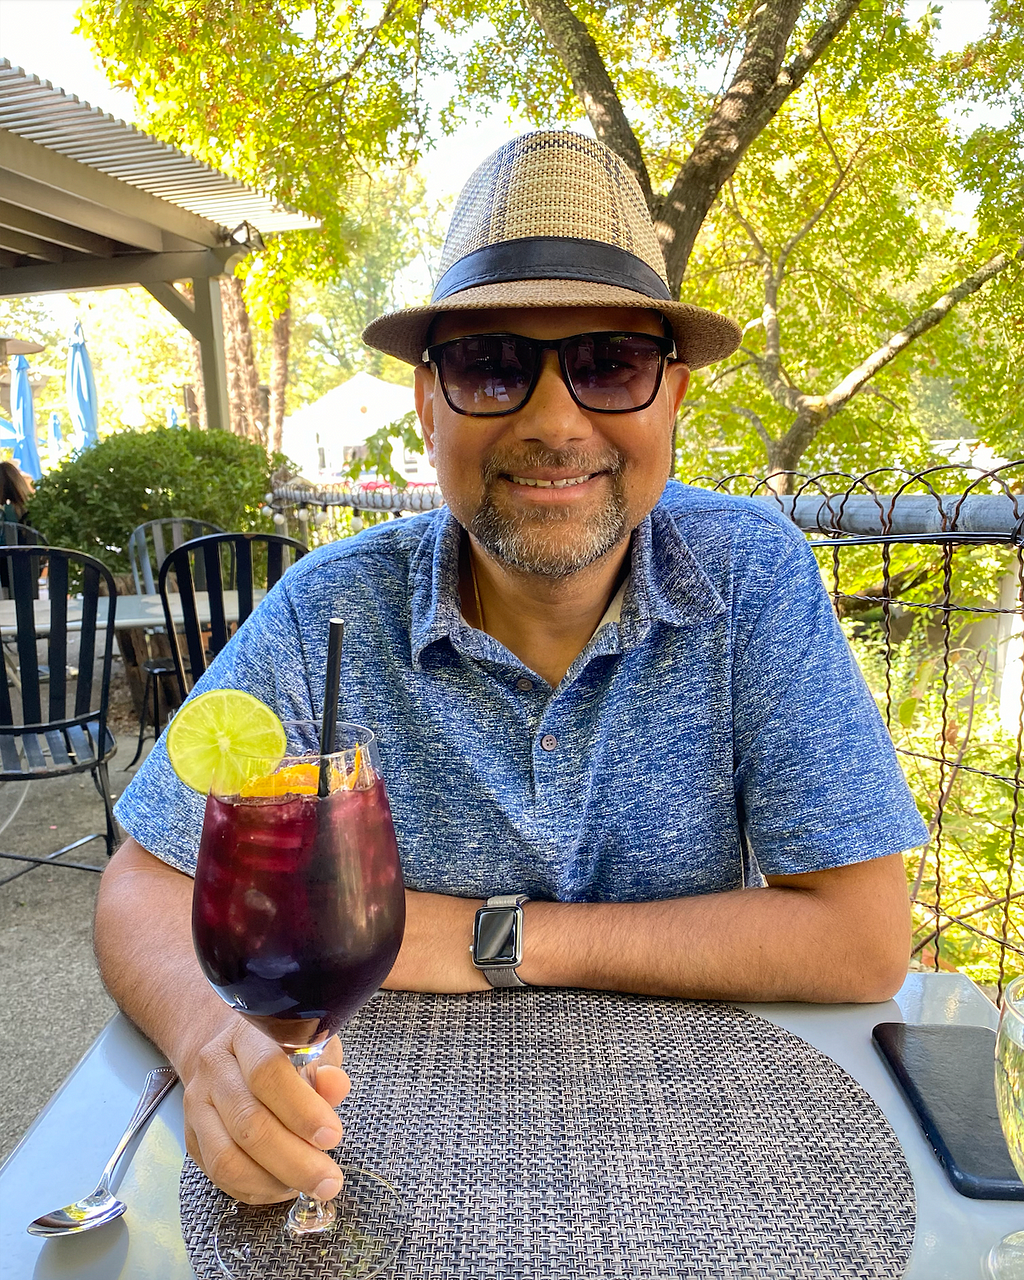 Dad smiling at mom while drinking Sangria in his beloved fedora.